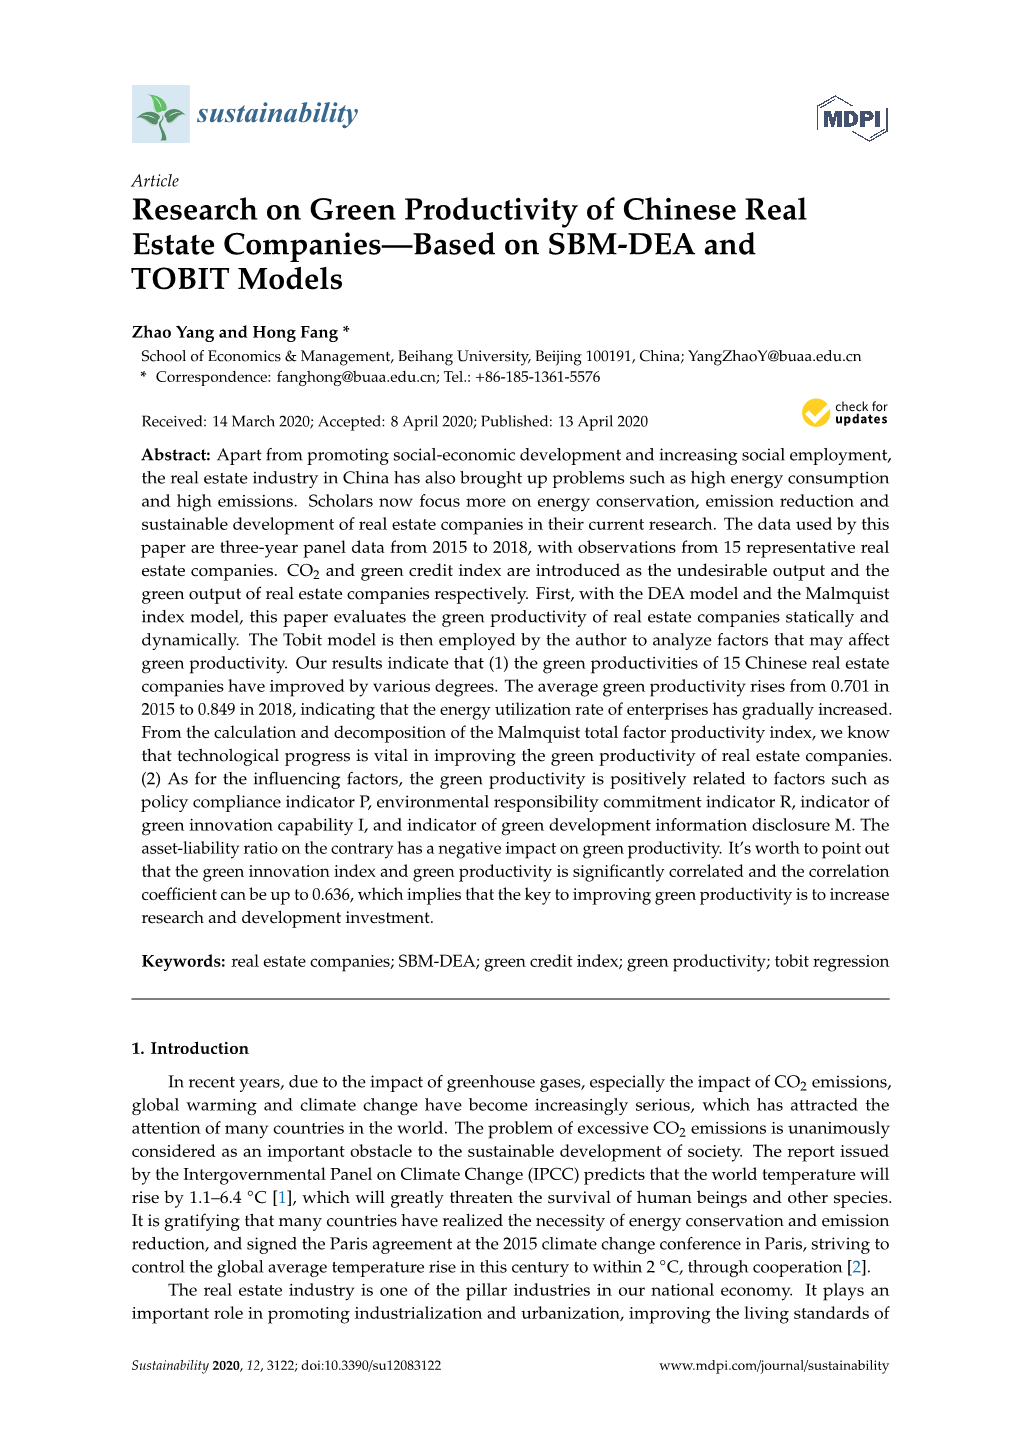 Research on Green Productivity of Chinese Real Estate Companies—Based on SBM-DEA and TOBIT Models